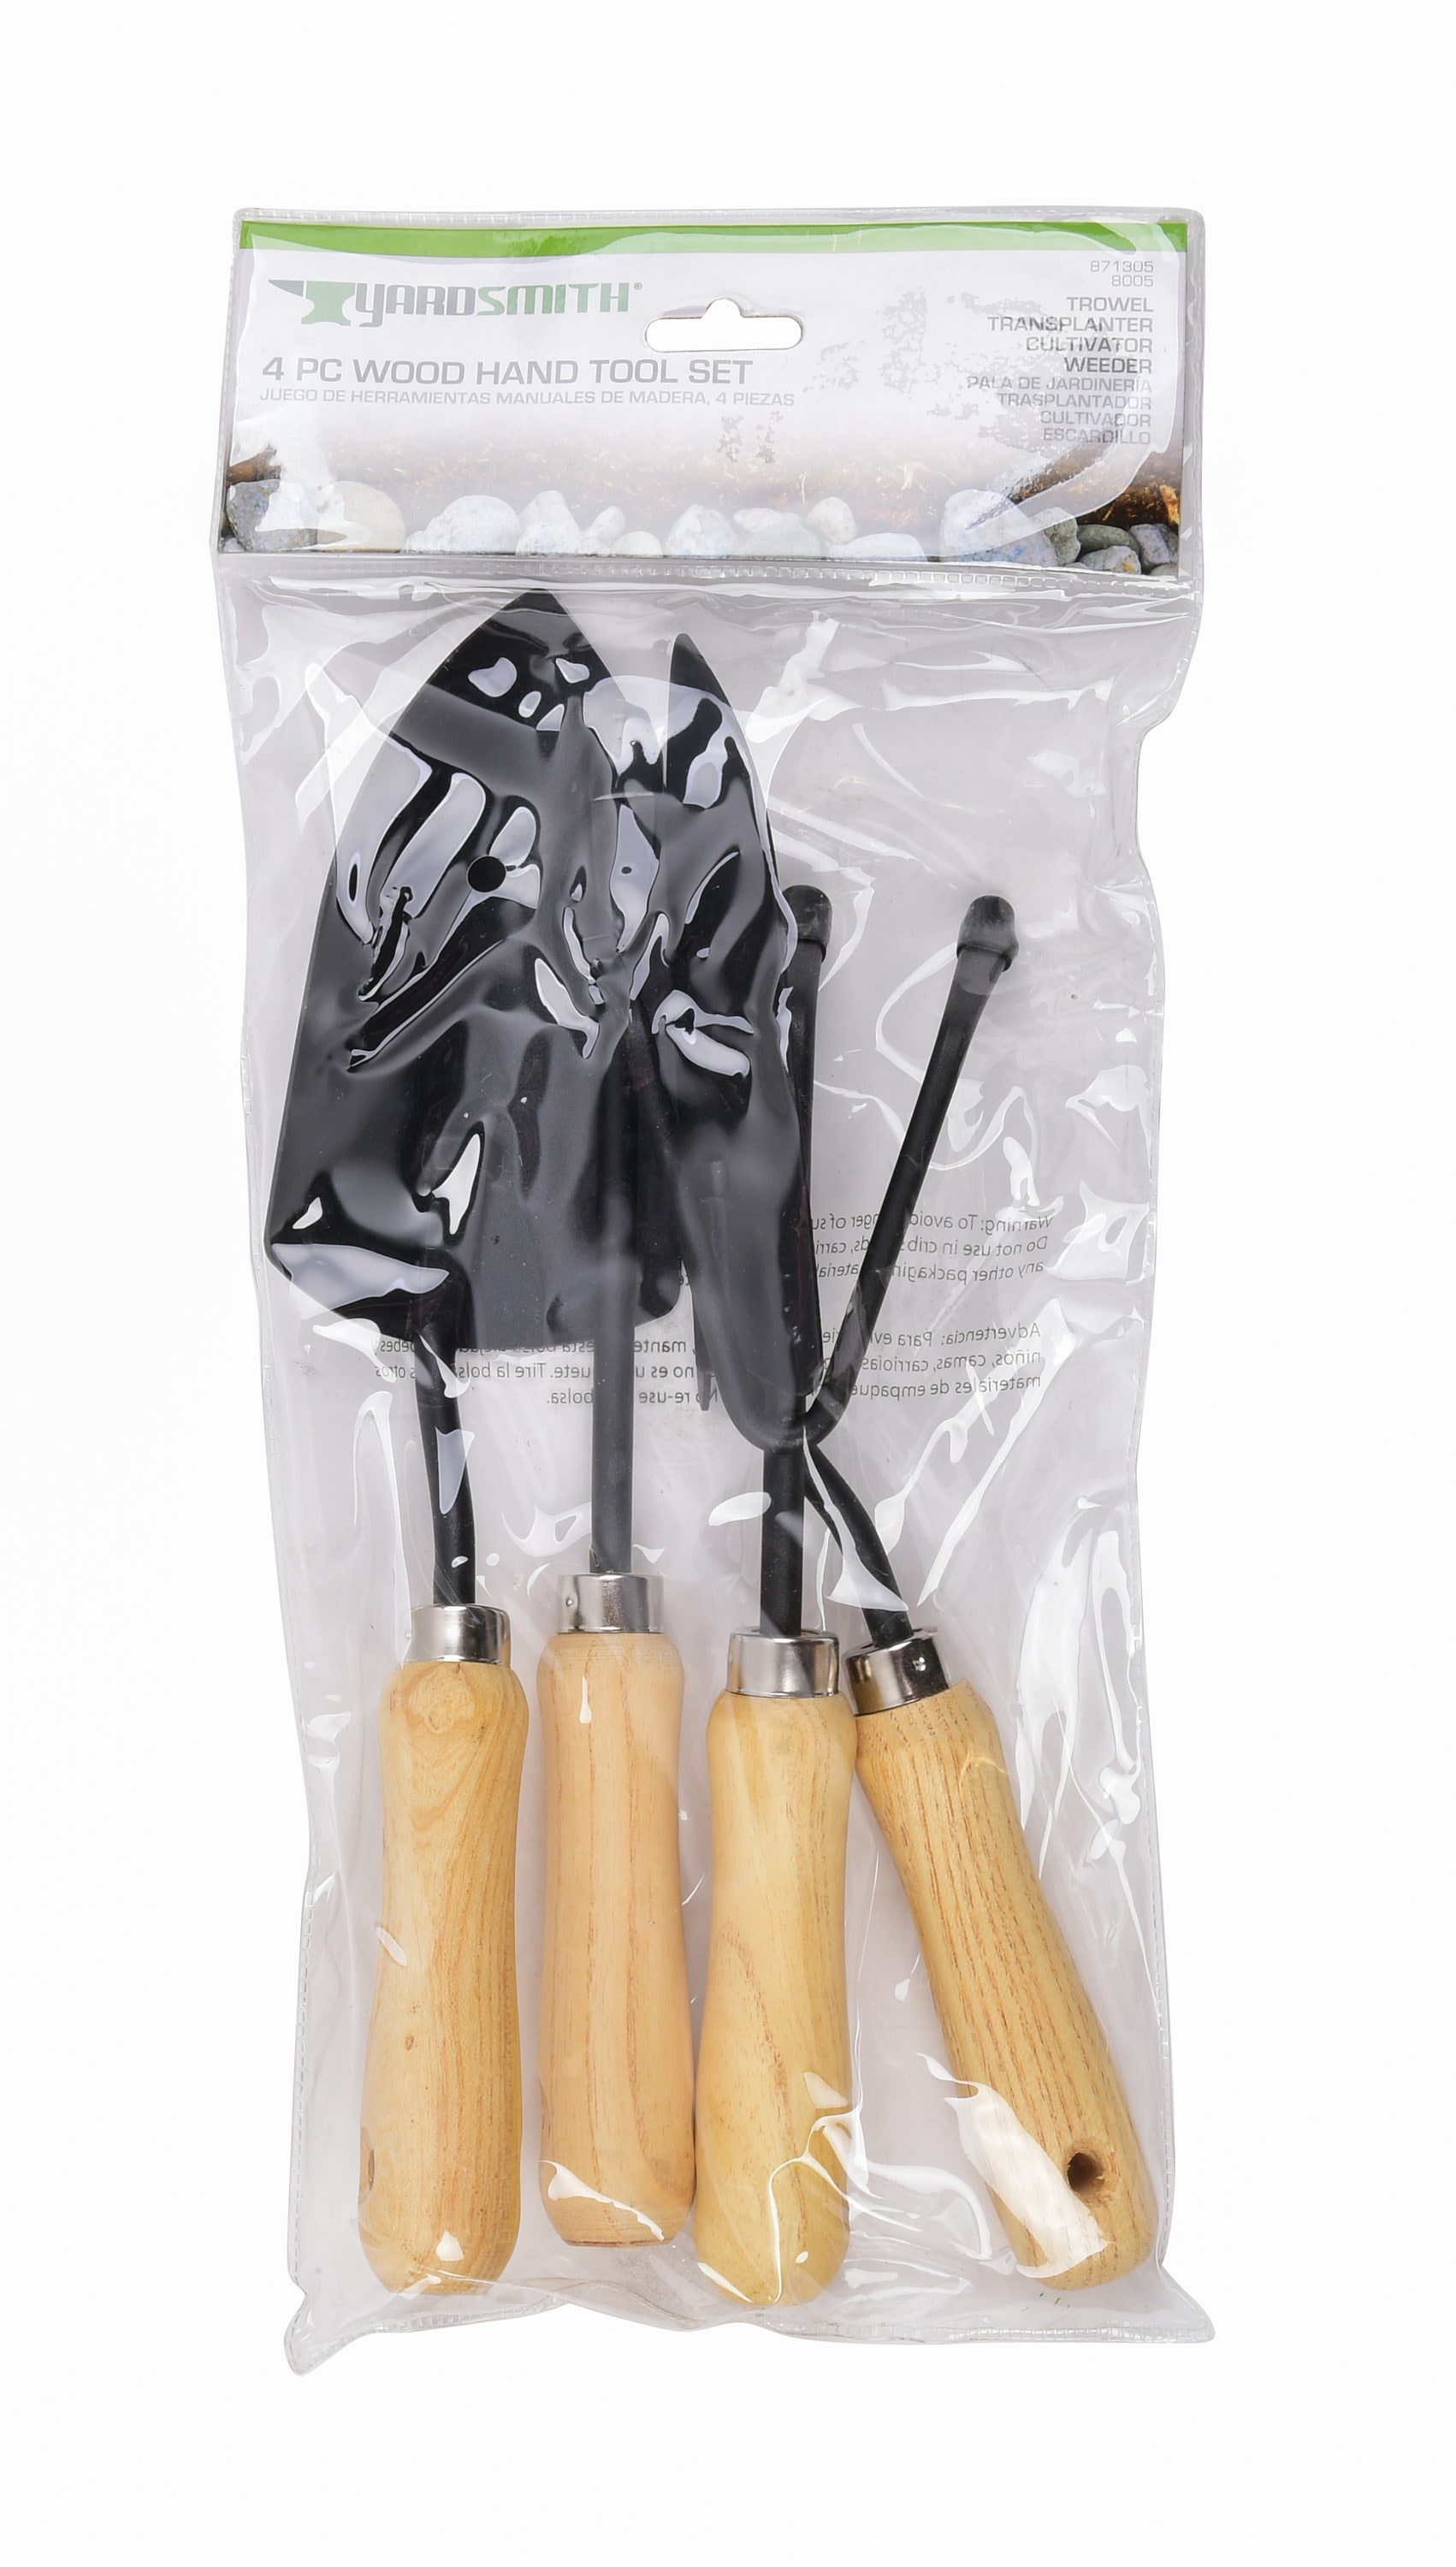 Gardening Hand Tool Set  Planting Spade, Cultivator, Hoe – by